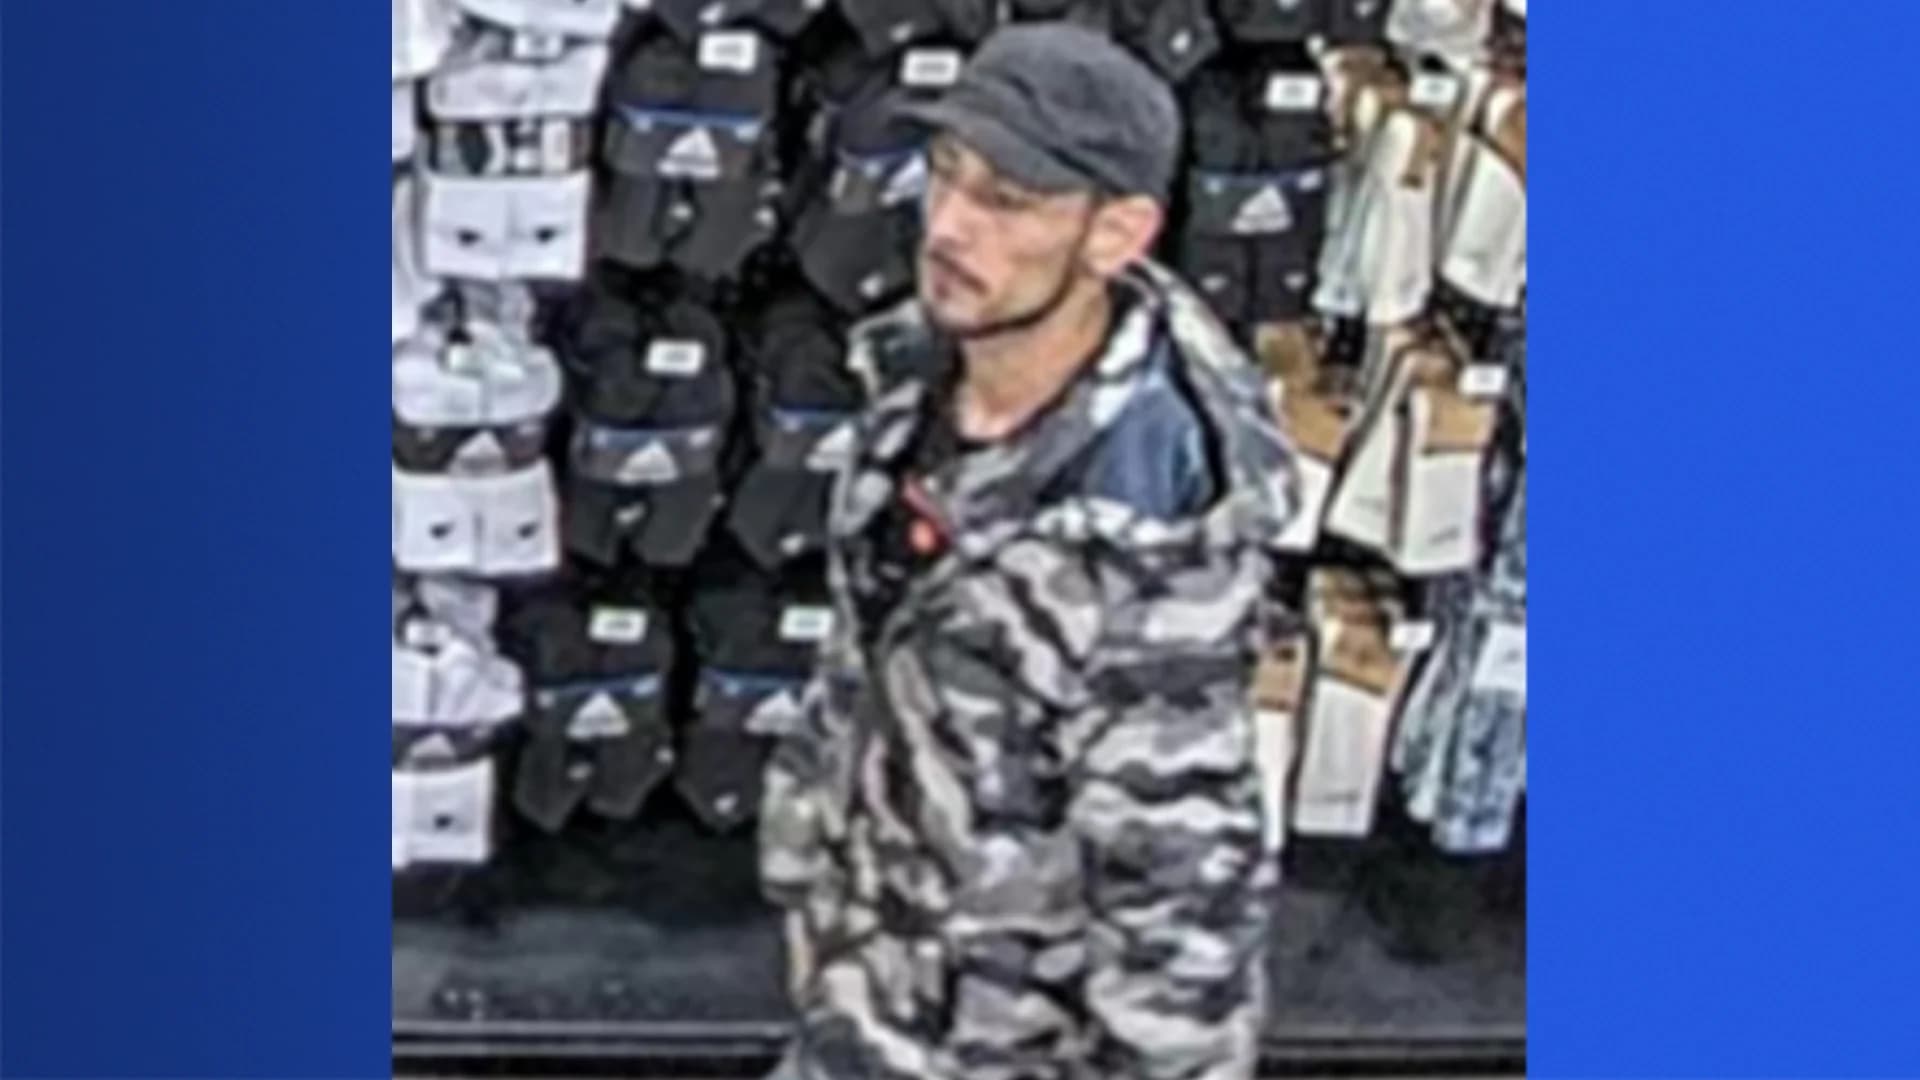 Suffolk police search for man who stole 1 sneaker from Dick’s Sporting Goods at Smith Haven Mall